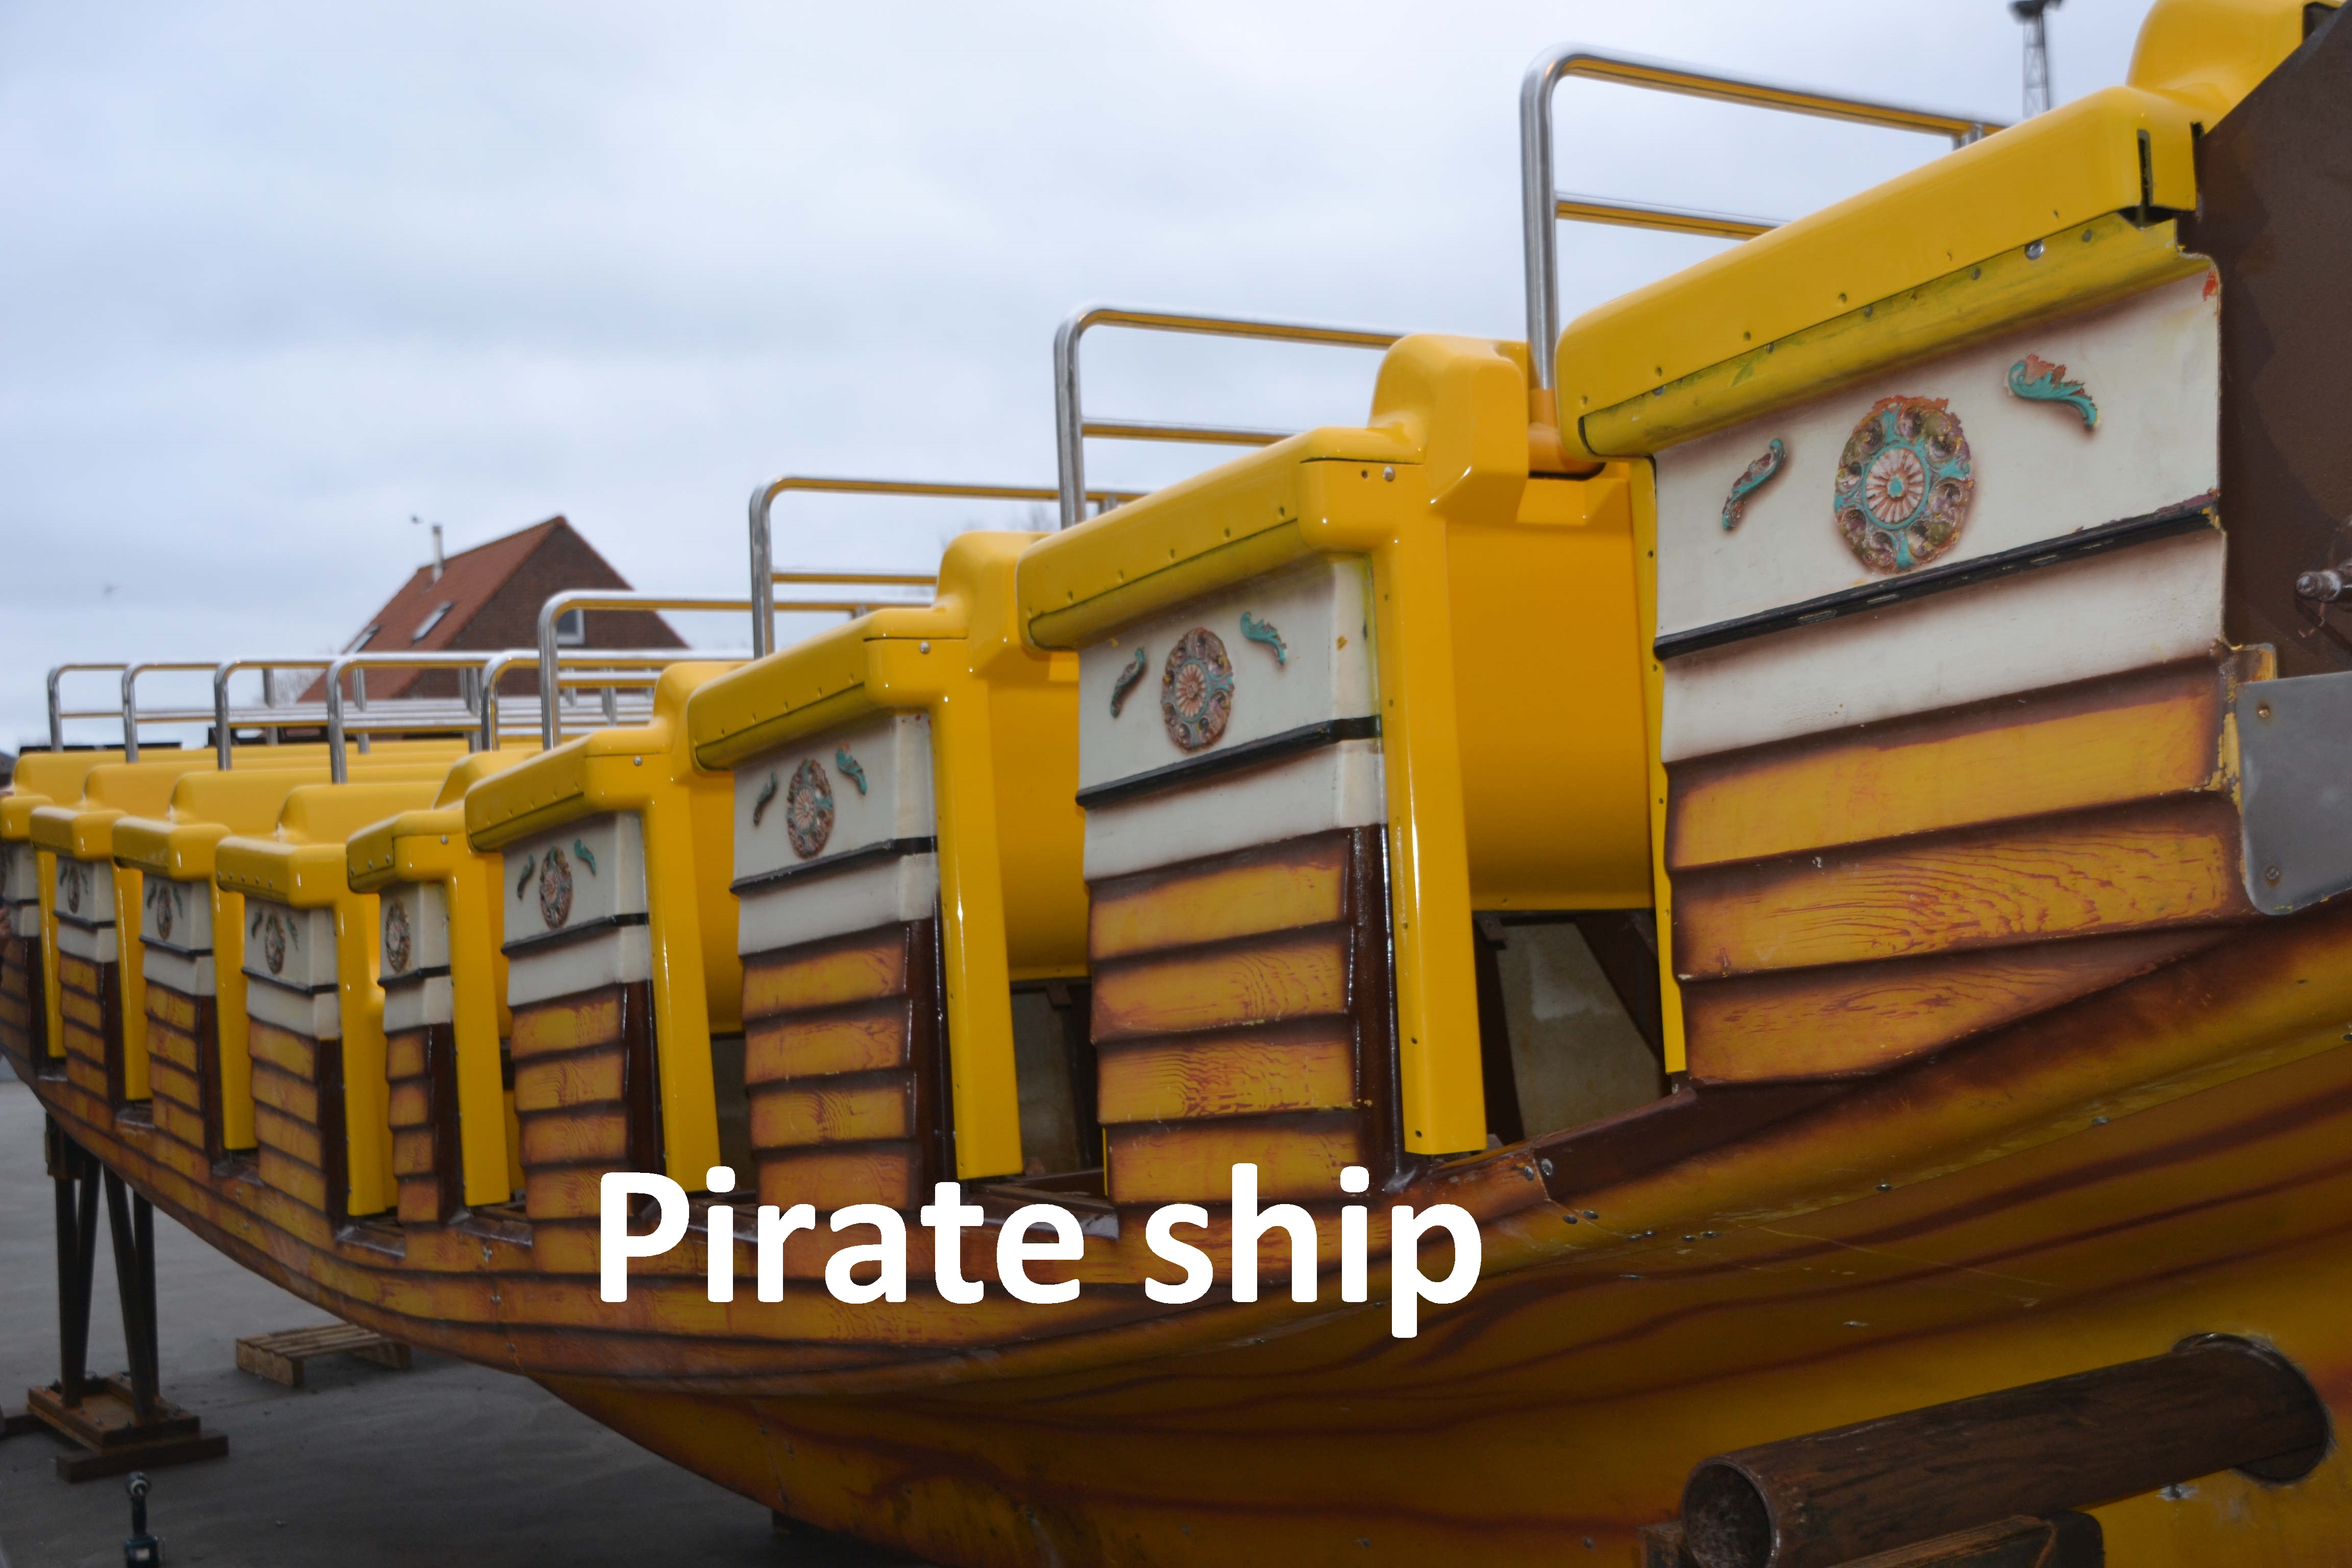 picture of pirate ship, pirate boat, themepark, roller coaster, family park, theme area, theming, props, sculptures, themed environments, entertainment, amusement parks, stand building, playgrounds, creative constructions, thematic eye-catchers,recreational area, Coating of figures,thematic elements, stages, props in fiberglass